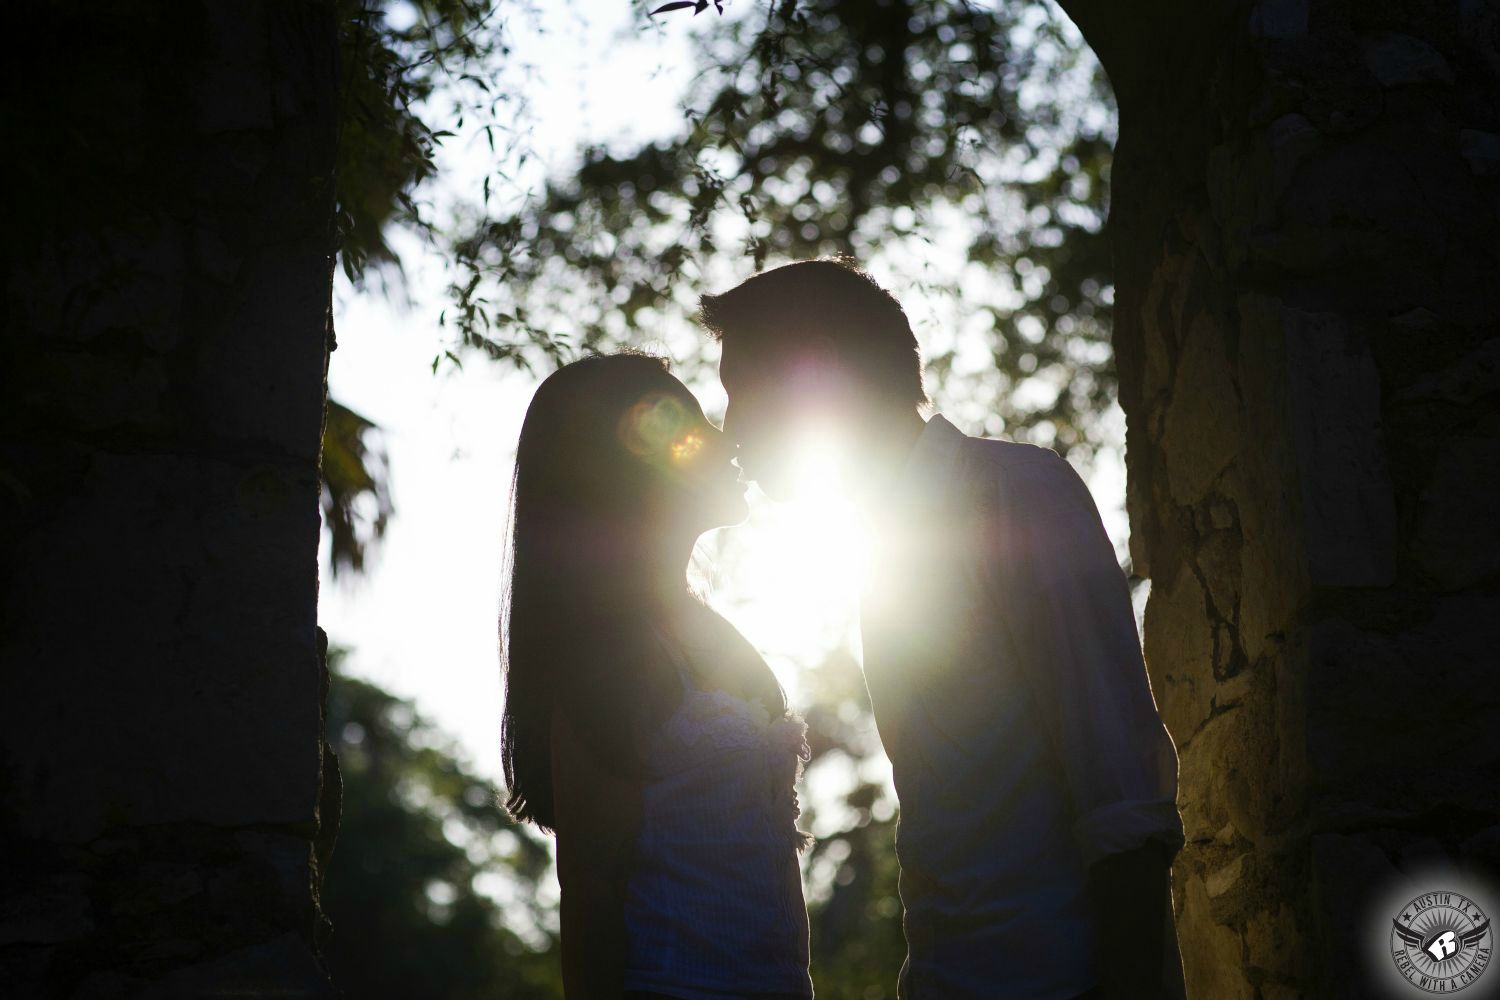 Silhouette of engagement couple kissing with the sun and lens flare in a stone arch with blue sky and blurry trees in the background at Mayfield Park in this tender engagement photograph in the City of Austin.  